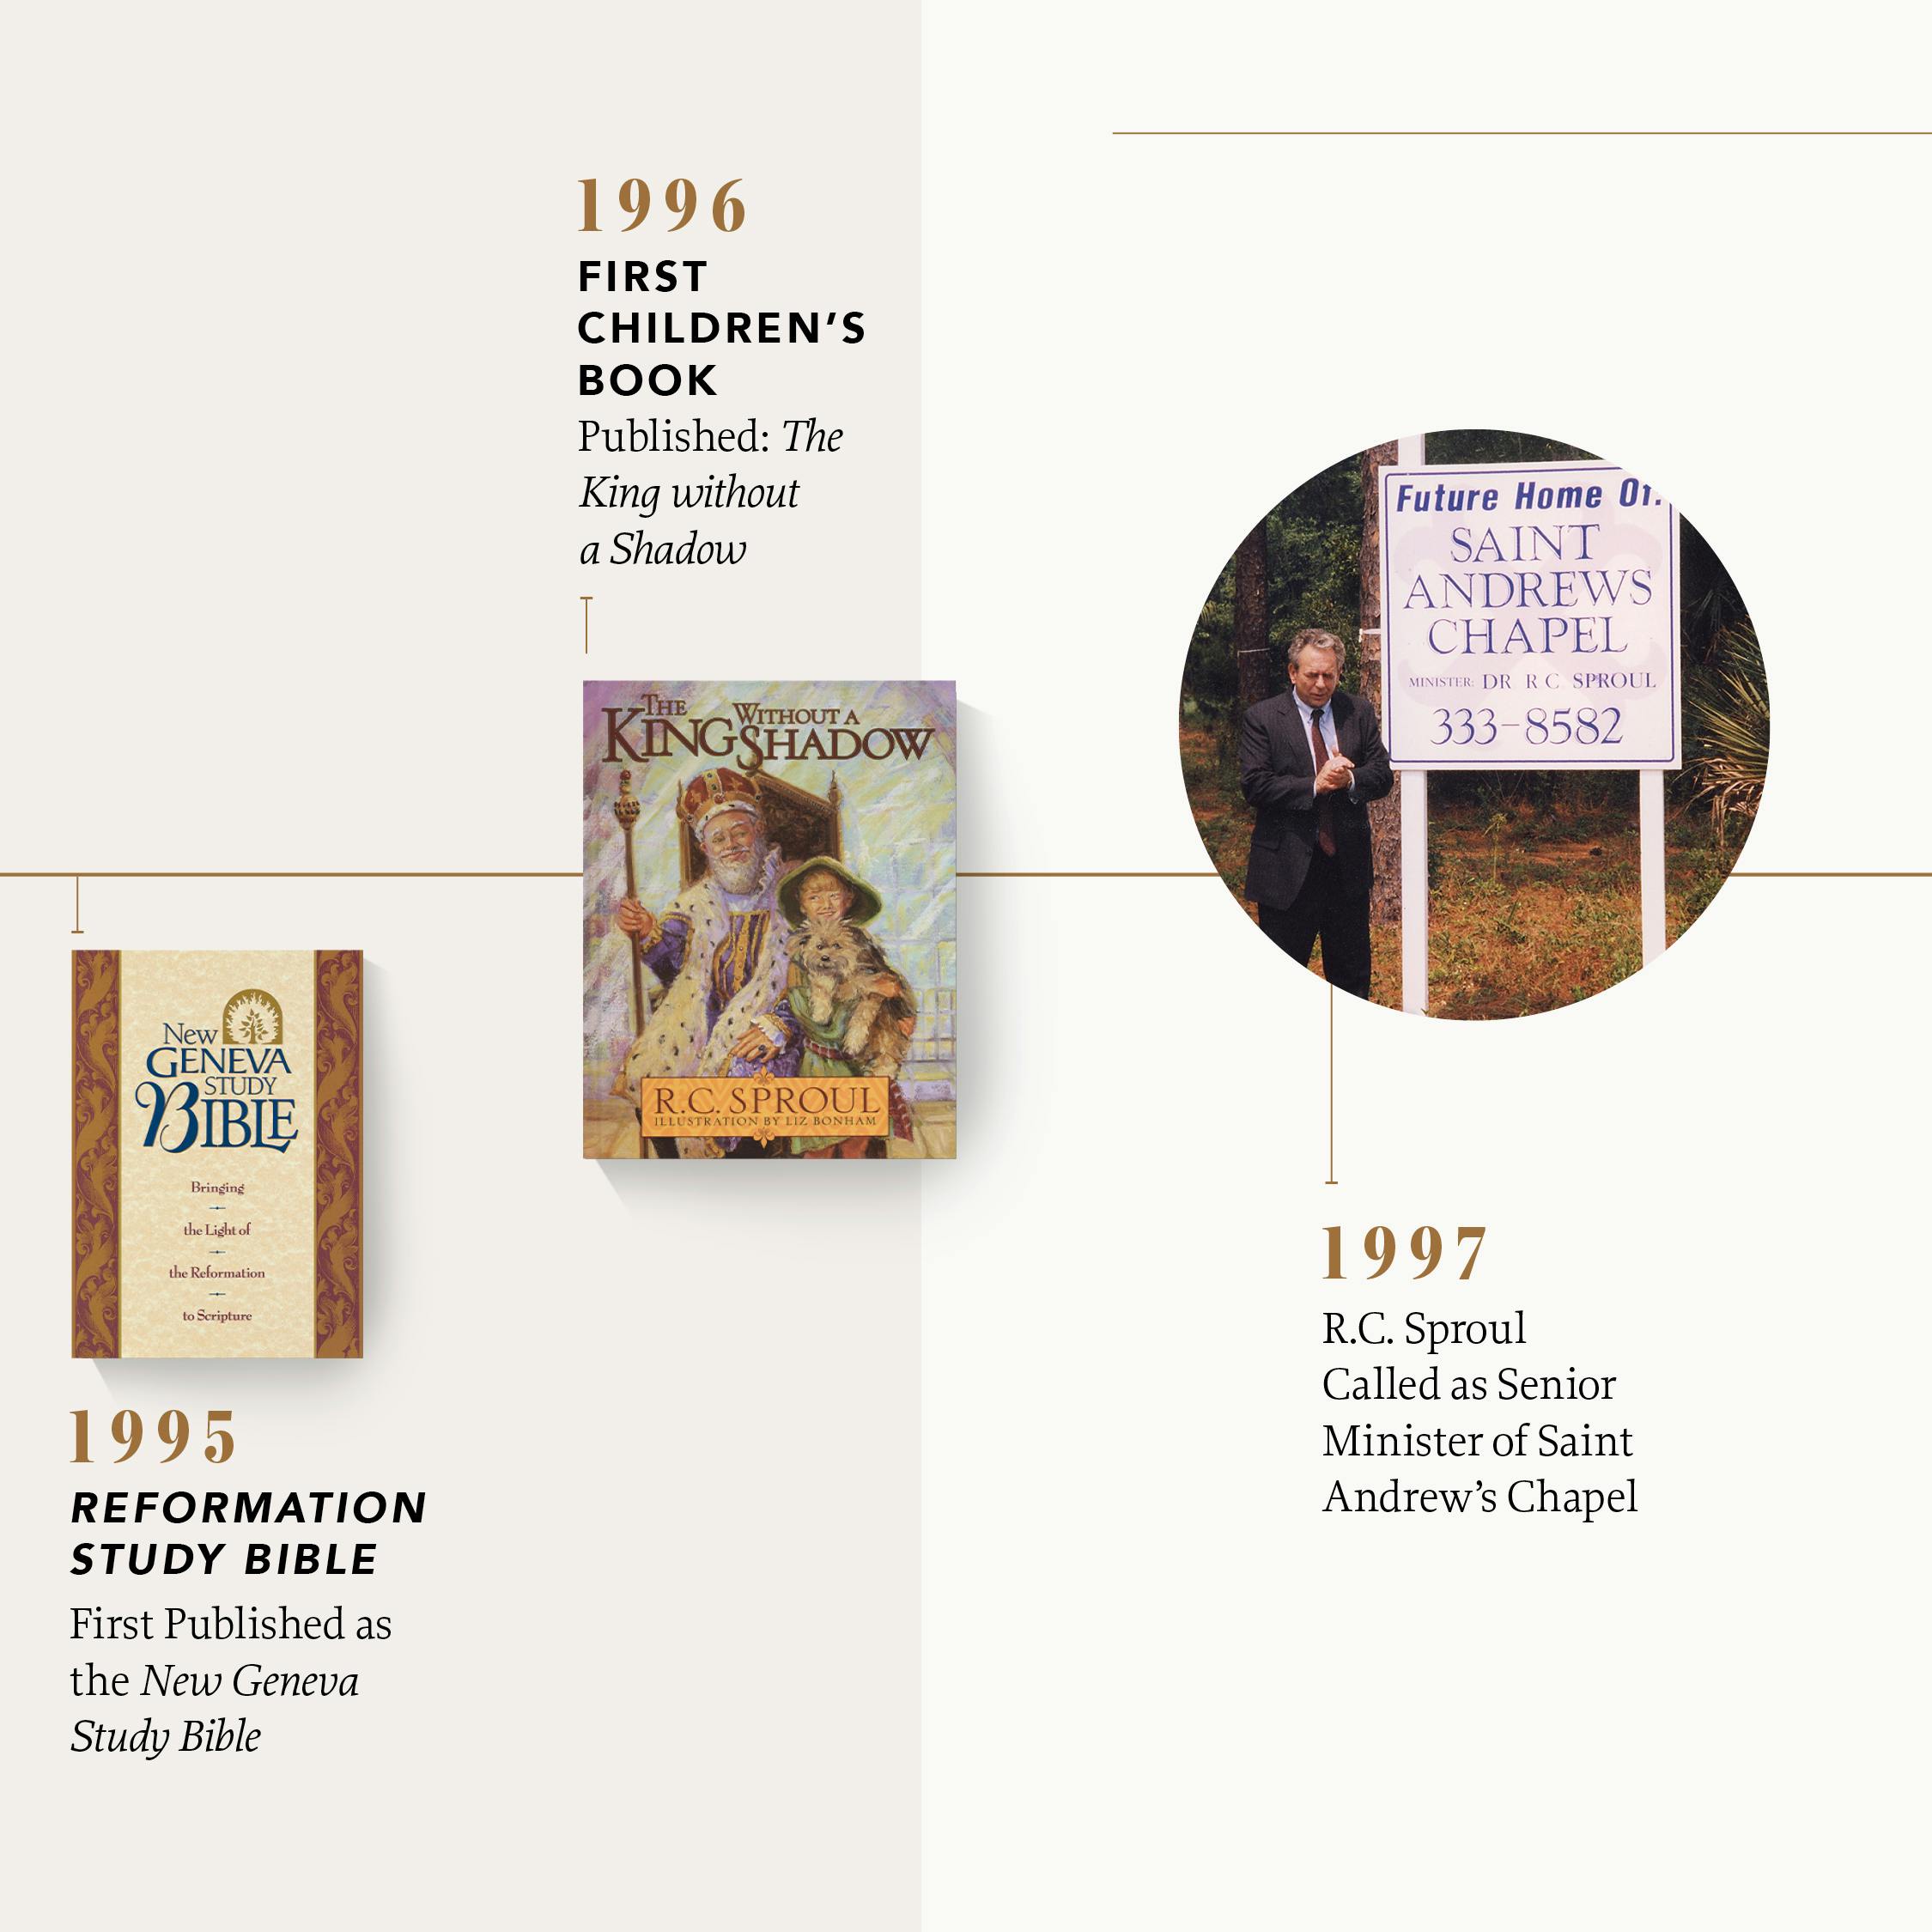 1995 :: Reformation Study Bible first published as the New Geneva Study Bible :: 1996 :: First Children's Book, The King without a Shadow published :: 1997 :: R.C. Sproul called as Senior Minister of Saint Andrew's Chapel